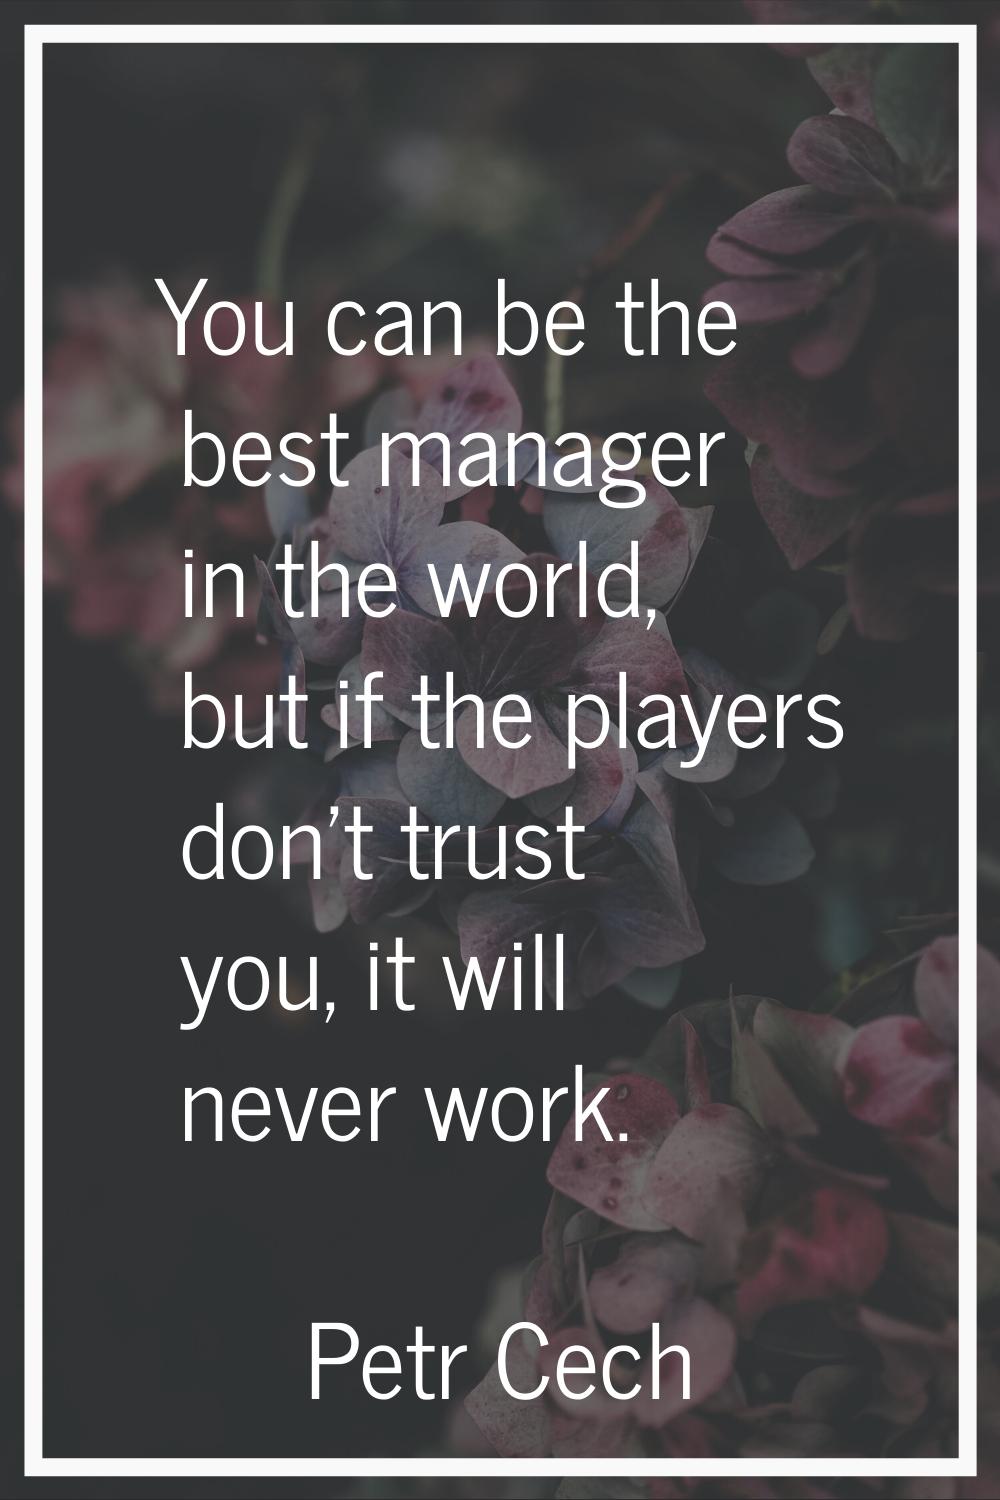 You can be the best manager in the world, but if the players don't trust you, it will never work.